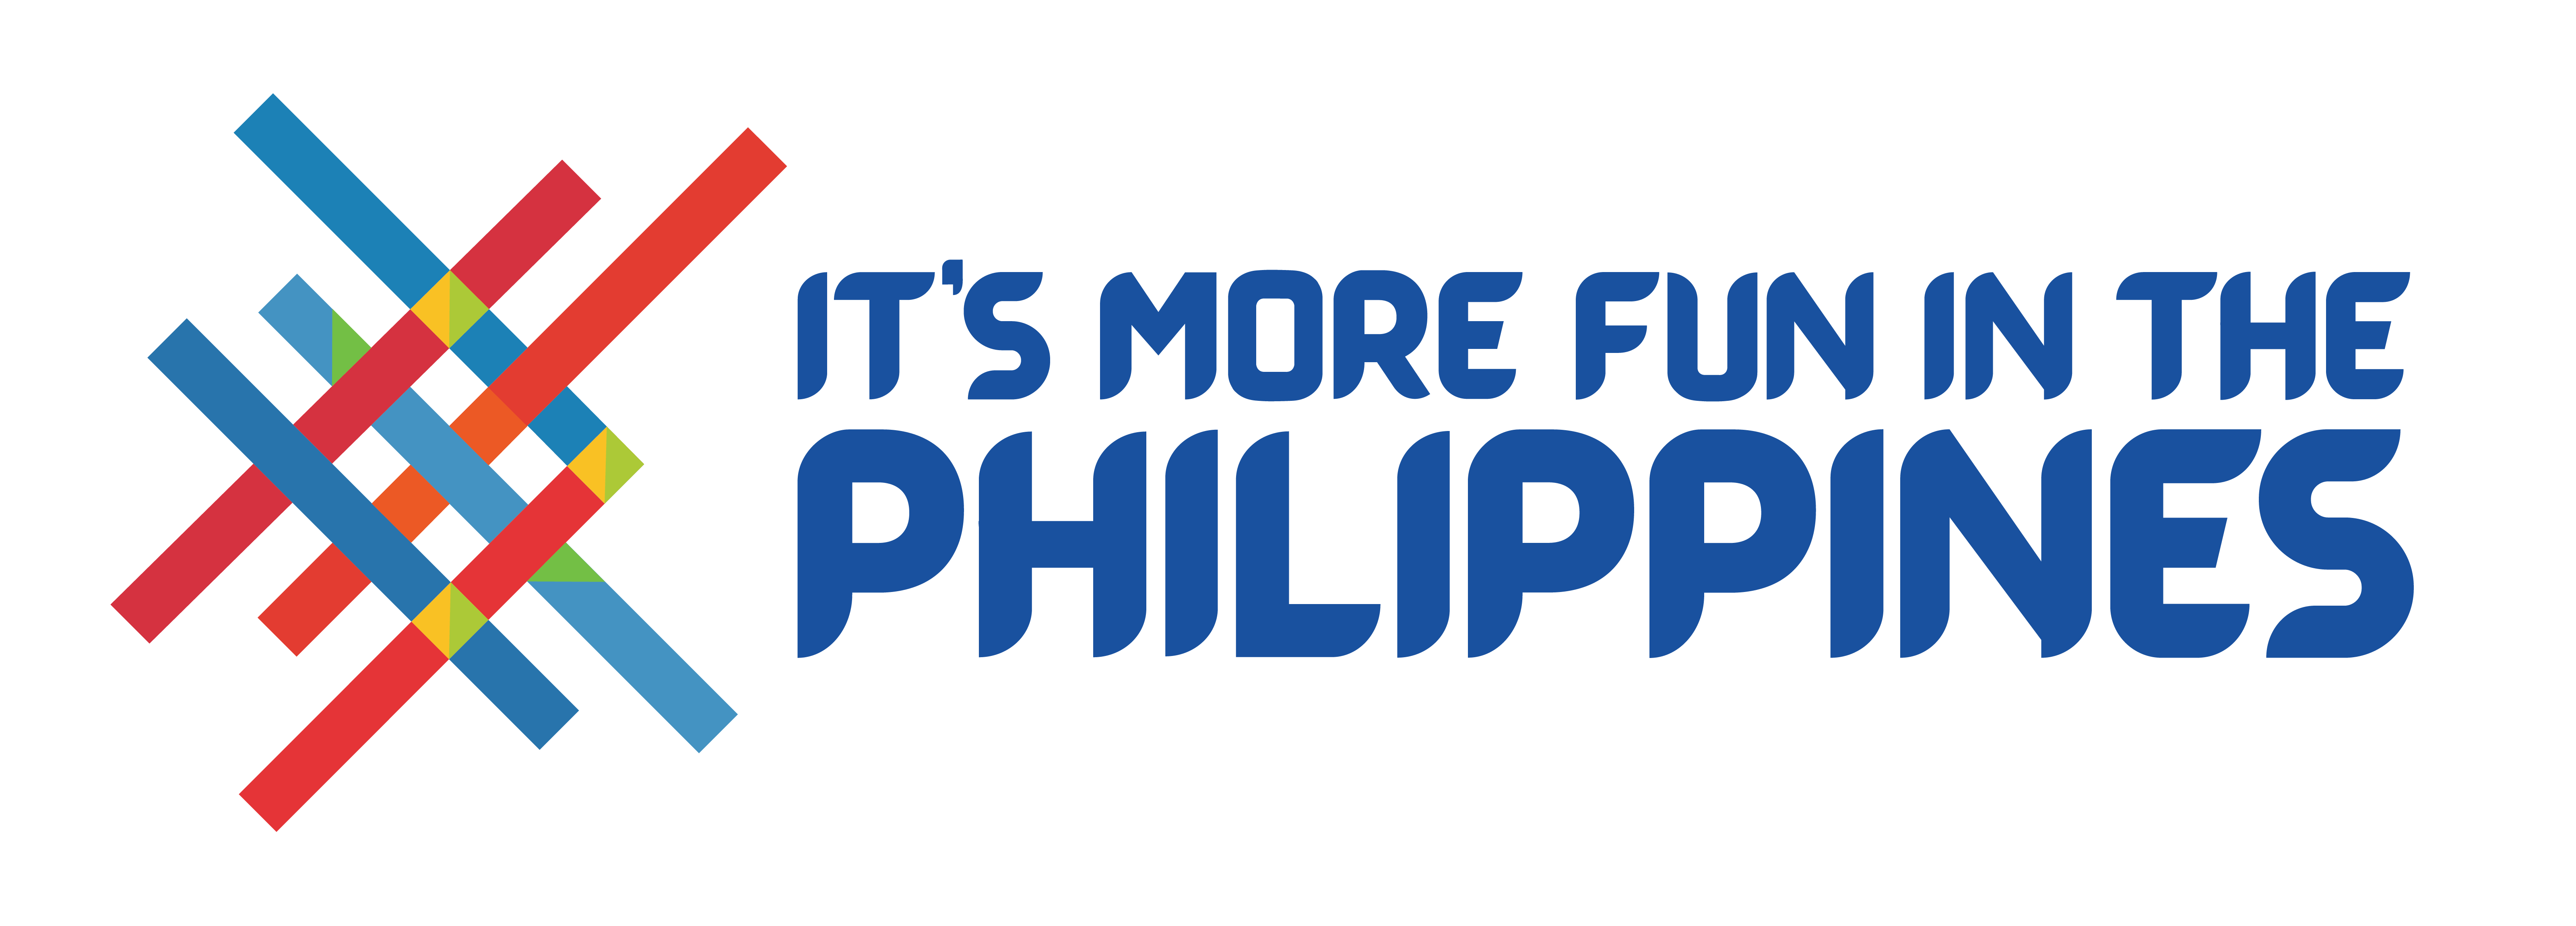 LOGO-DOT Its more fun in the philippines